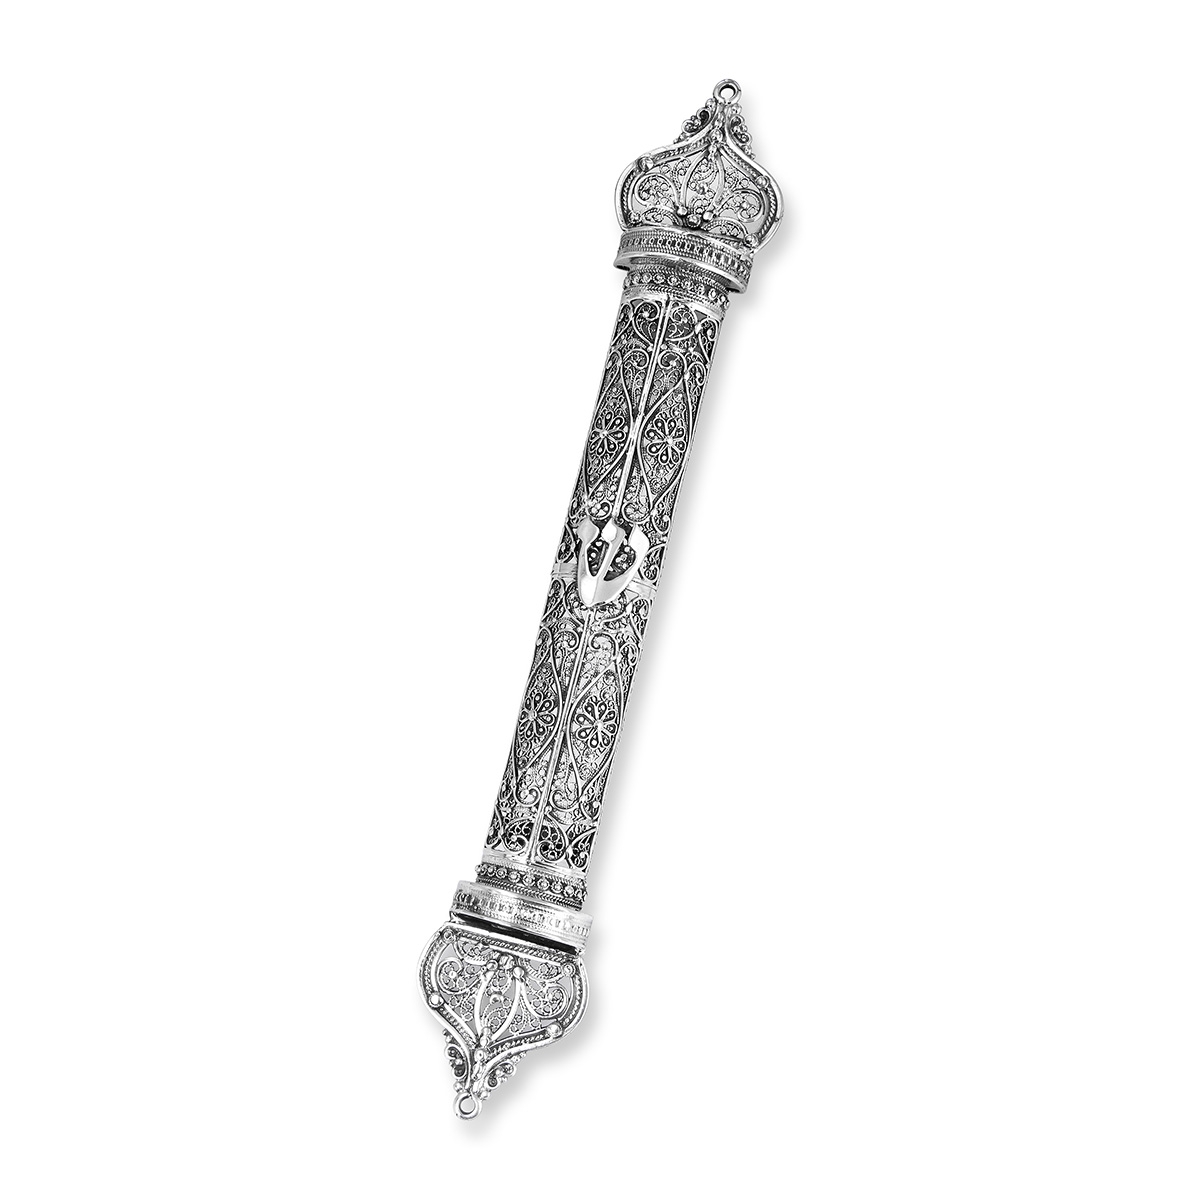 Traditional Yemenite Art Chic Handcrafted Sterling Silver Extra Large Mezuzah Case With Filigree Design - 1